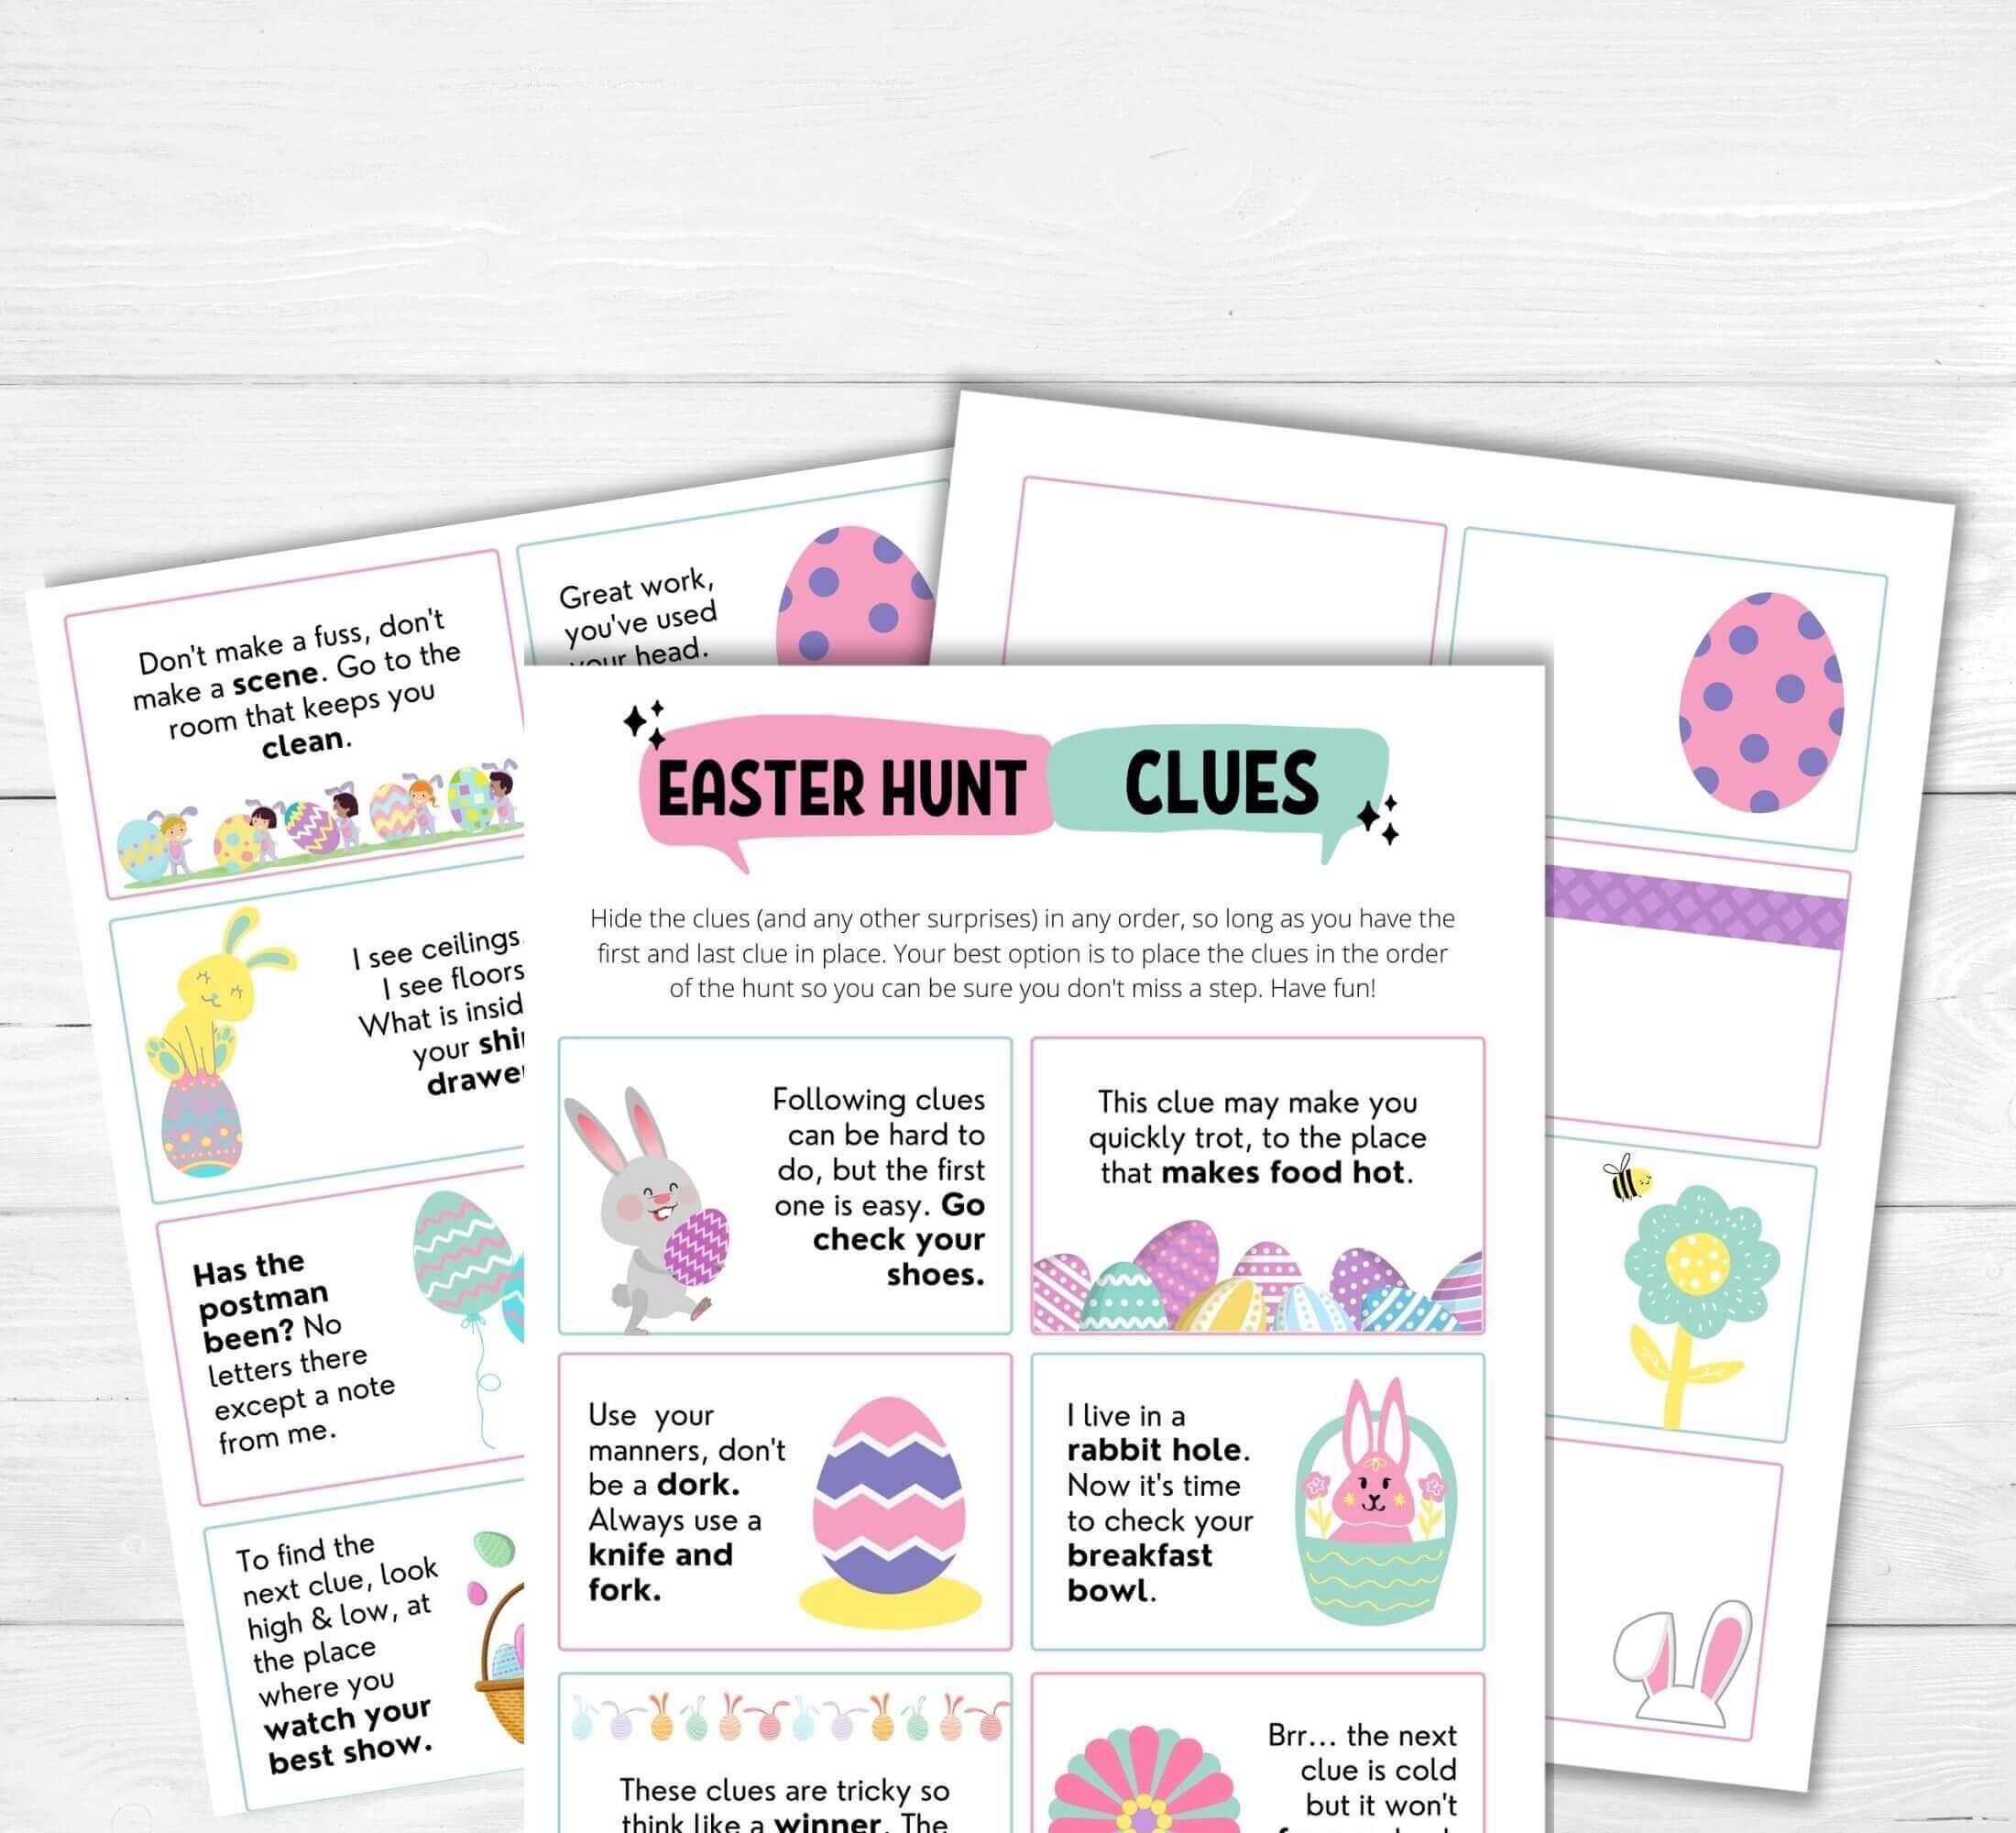 Awesome Easter Egg Hunt Ideas For Kids & Adults (Free Printable Clues)